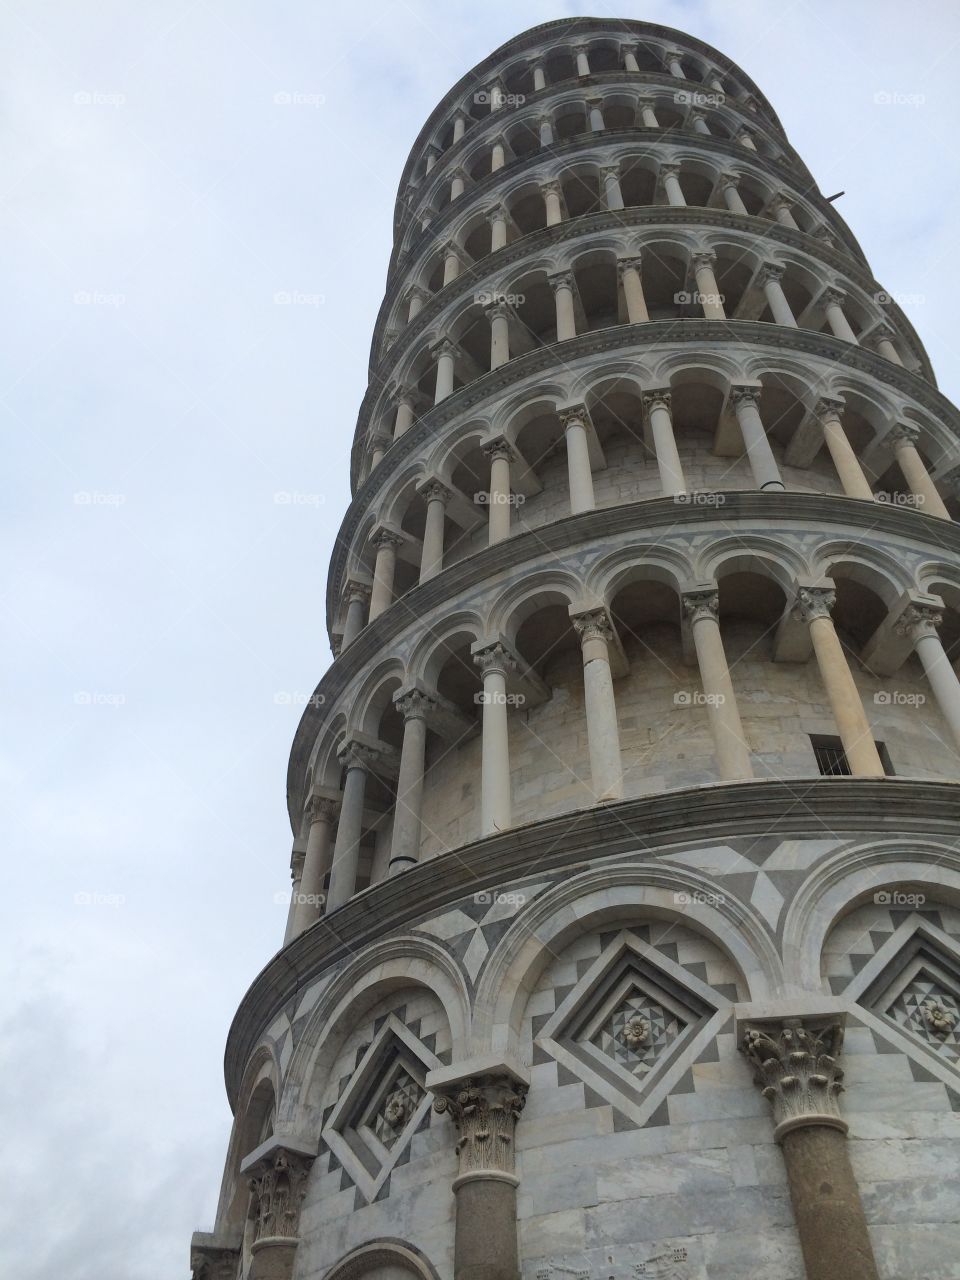 Leaning Tower. Leaning Tower of Pisa